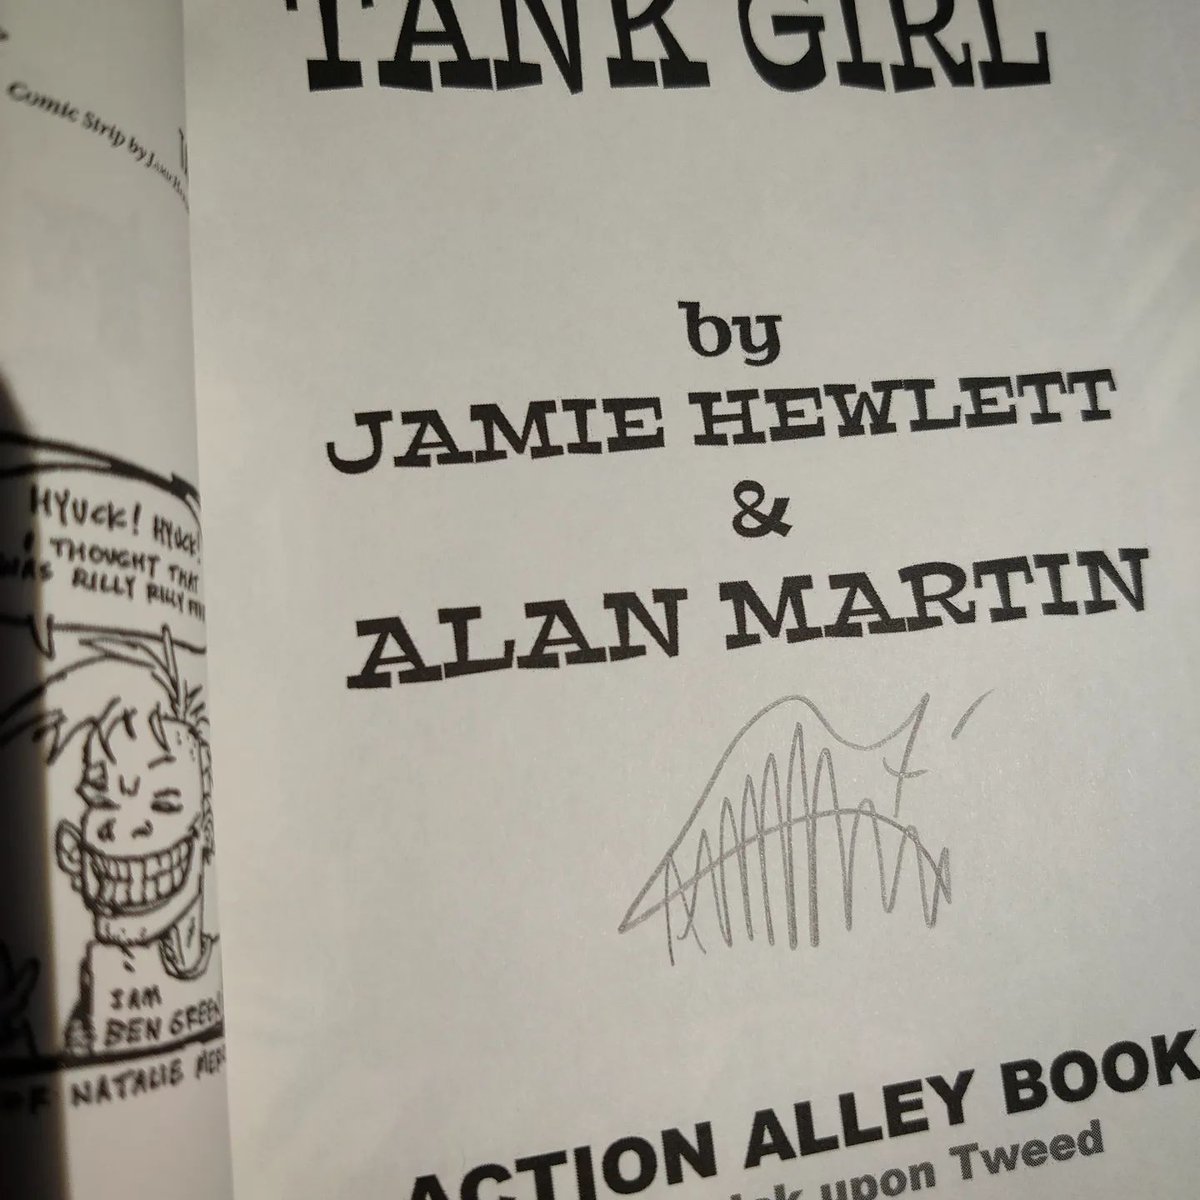 Image of A TASTE OF TANK GIRL - signed 1st Edition - with exclusive Orange Patch, Poster, and print!